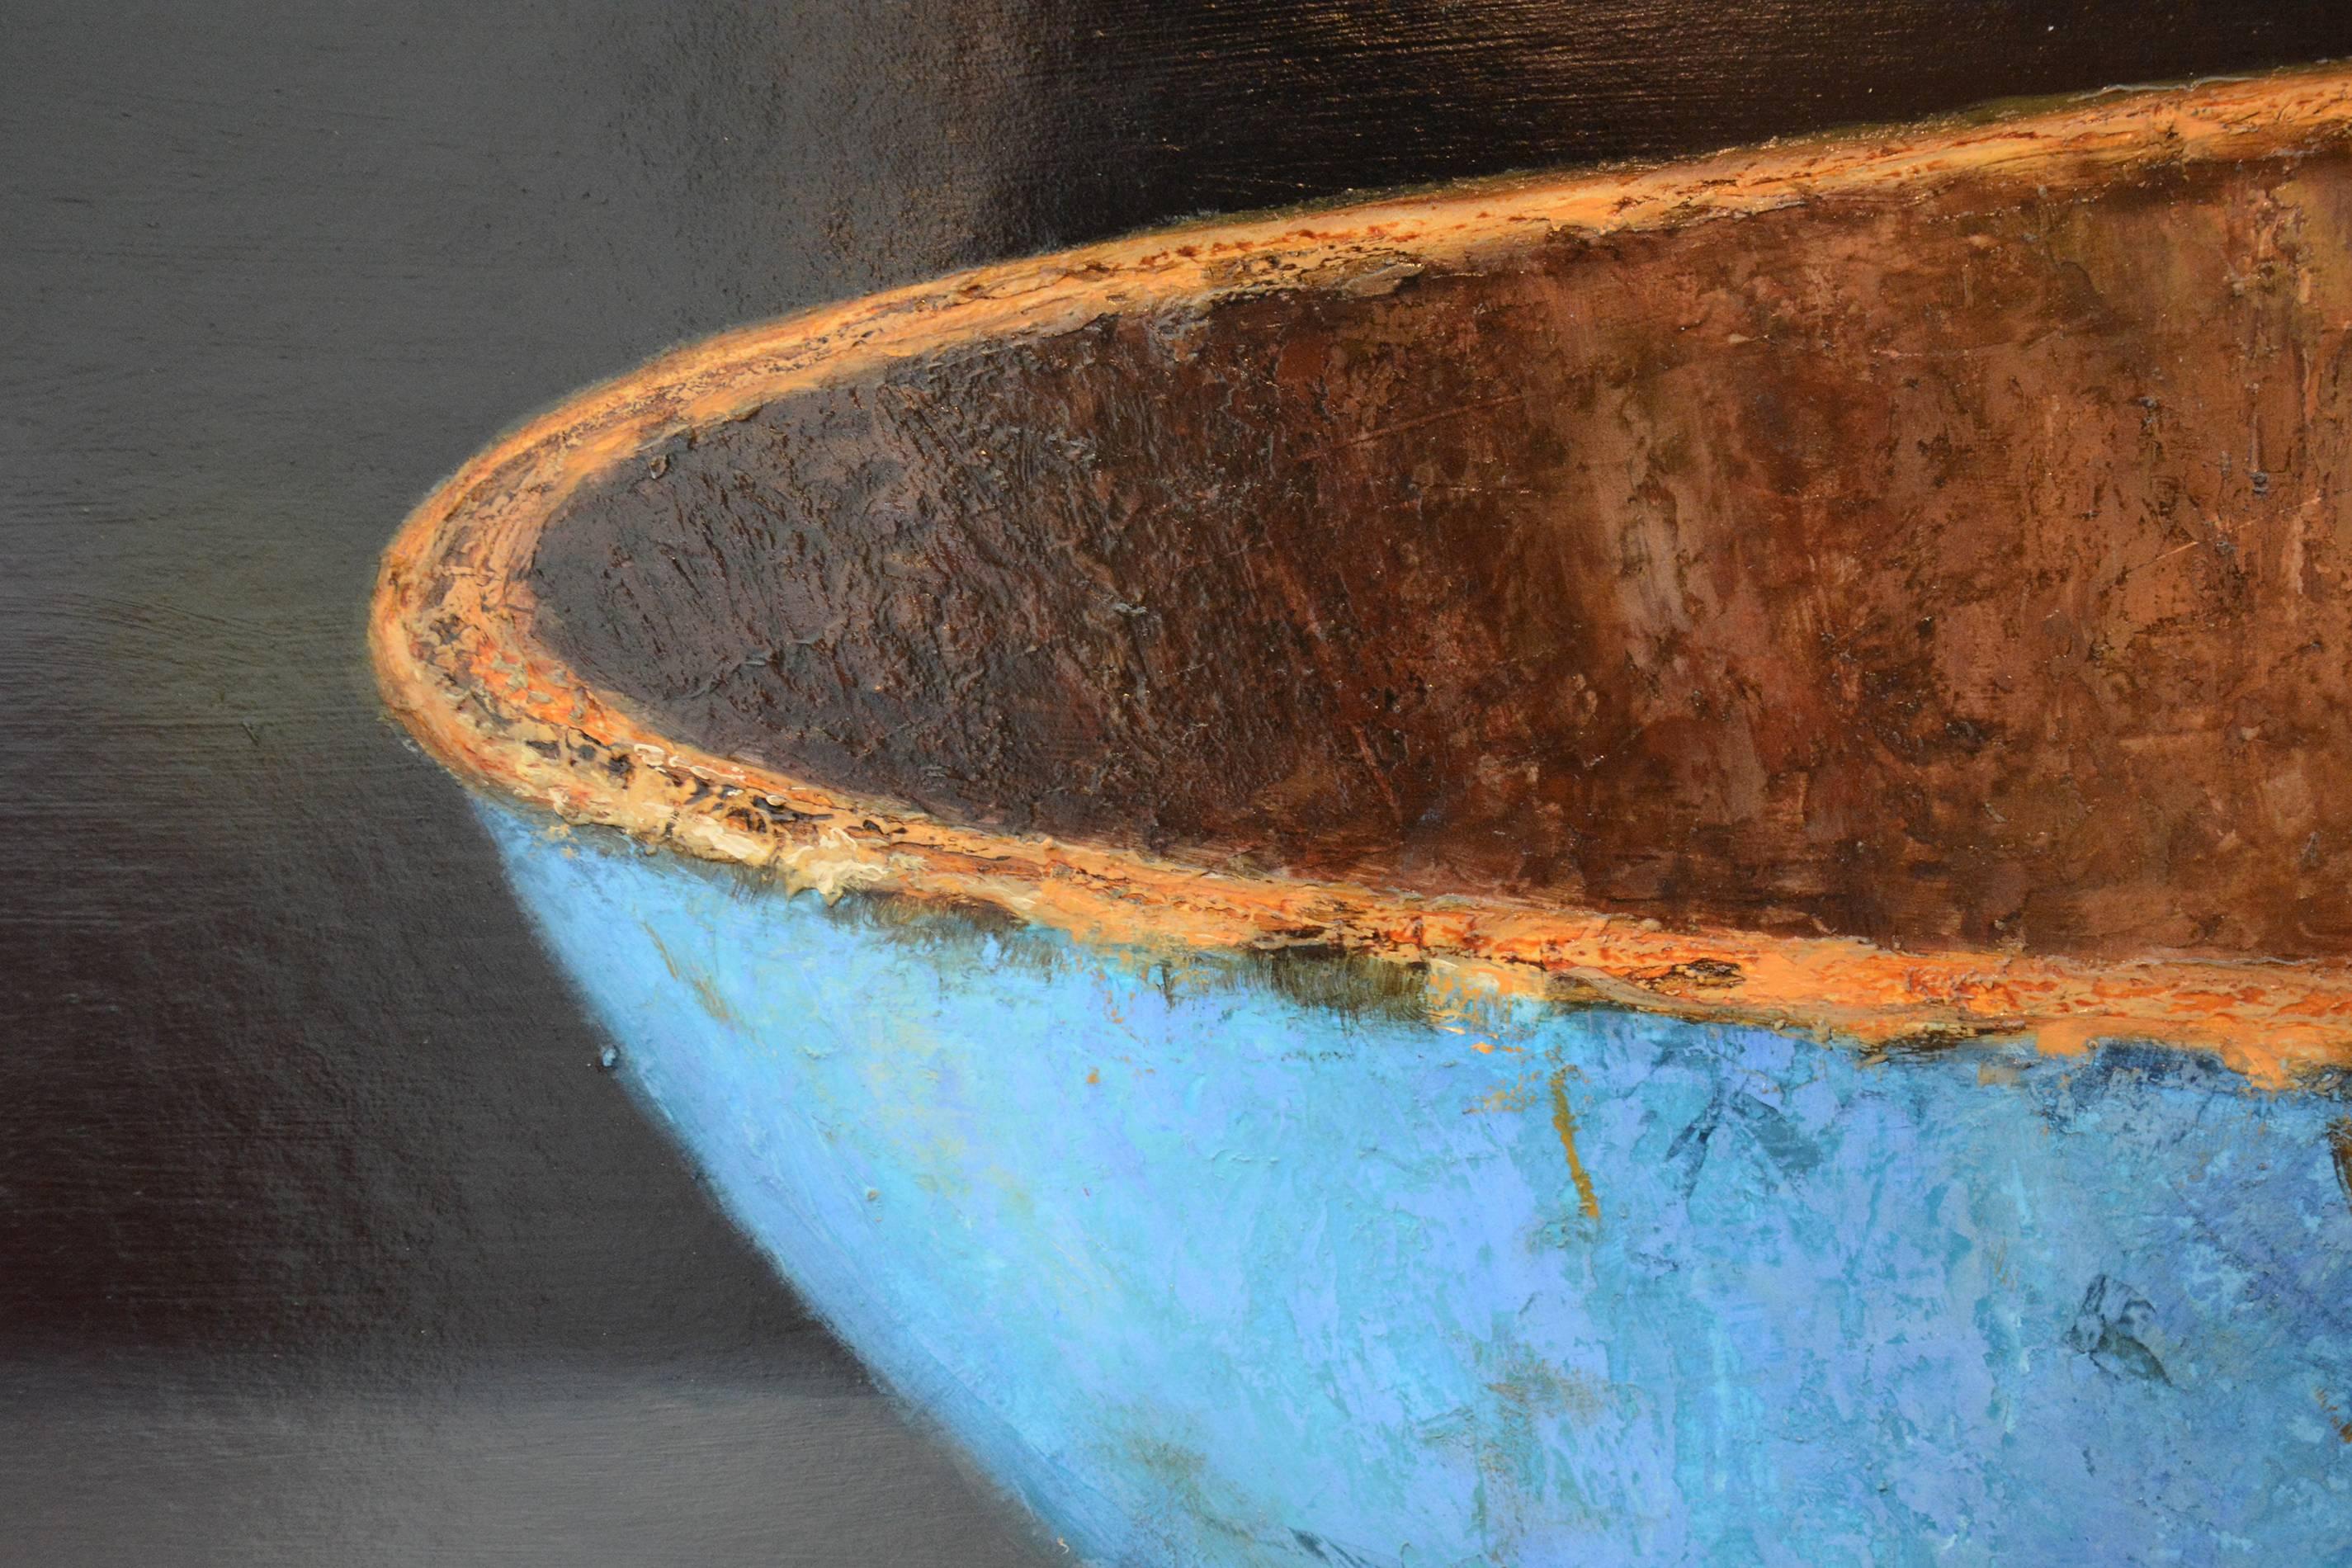 Still life of antique blue and gold bowl.  Oil on panel.
 
Ciba Karisik was born in Sarajevo in 1959. As a grandson of two artists, he revealed his creative inheritance at an early age. Invited to attend the Sarajevo Academy of Fine Art, Ciba